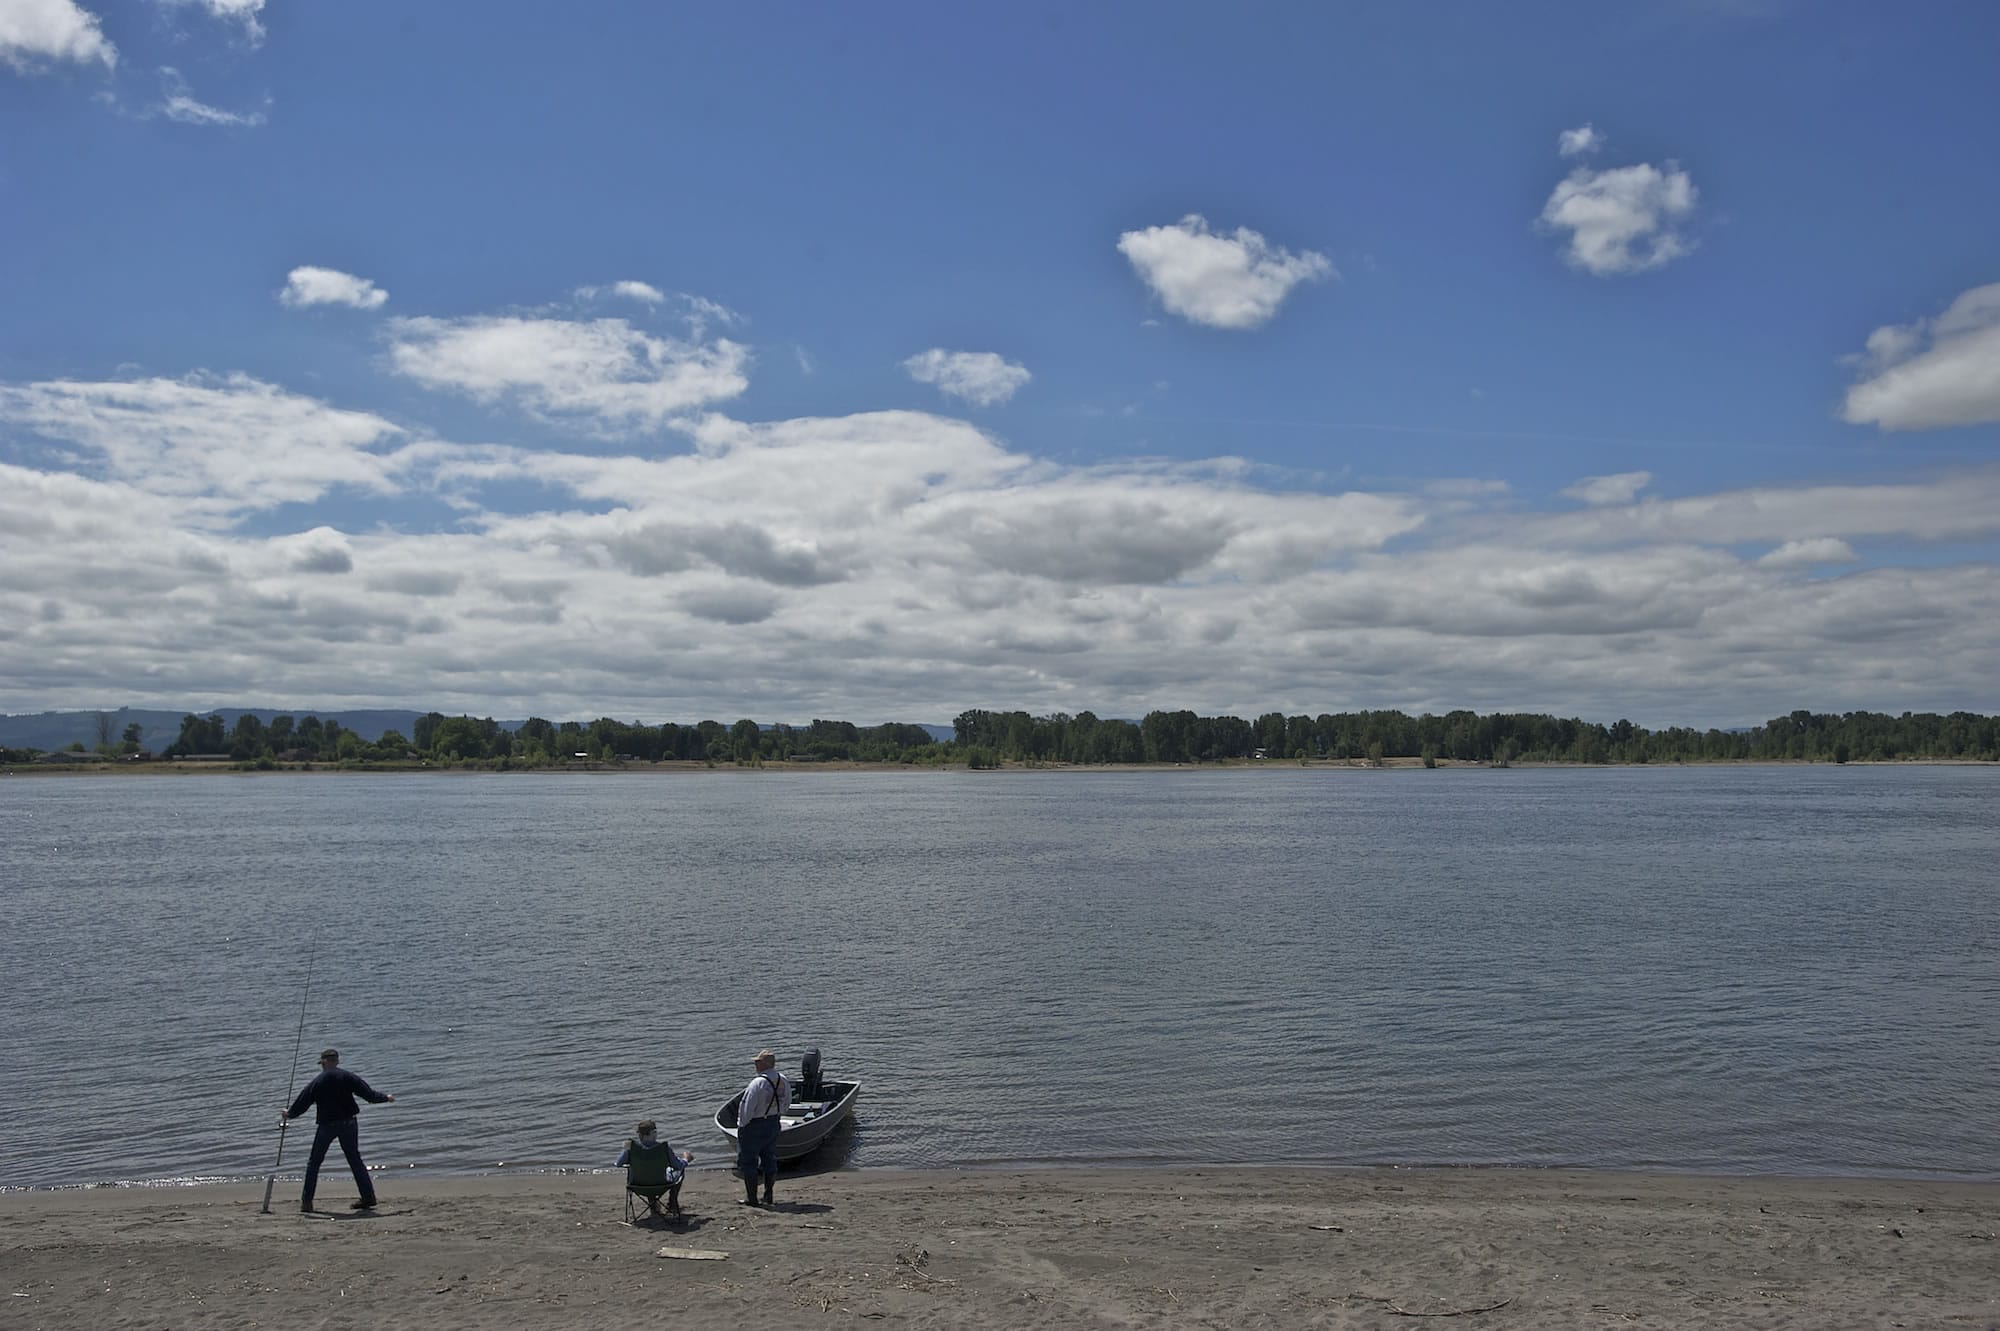 Sand Tampers Club members, from left, Guy Miller, 54, of Felida, Art McGrew, 73, of Vancouver, and Wally Schriener, 76, of Battle Ground, fish the Tena Bar on The Columbia River on Friday.